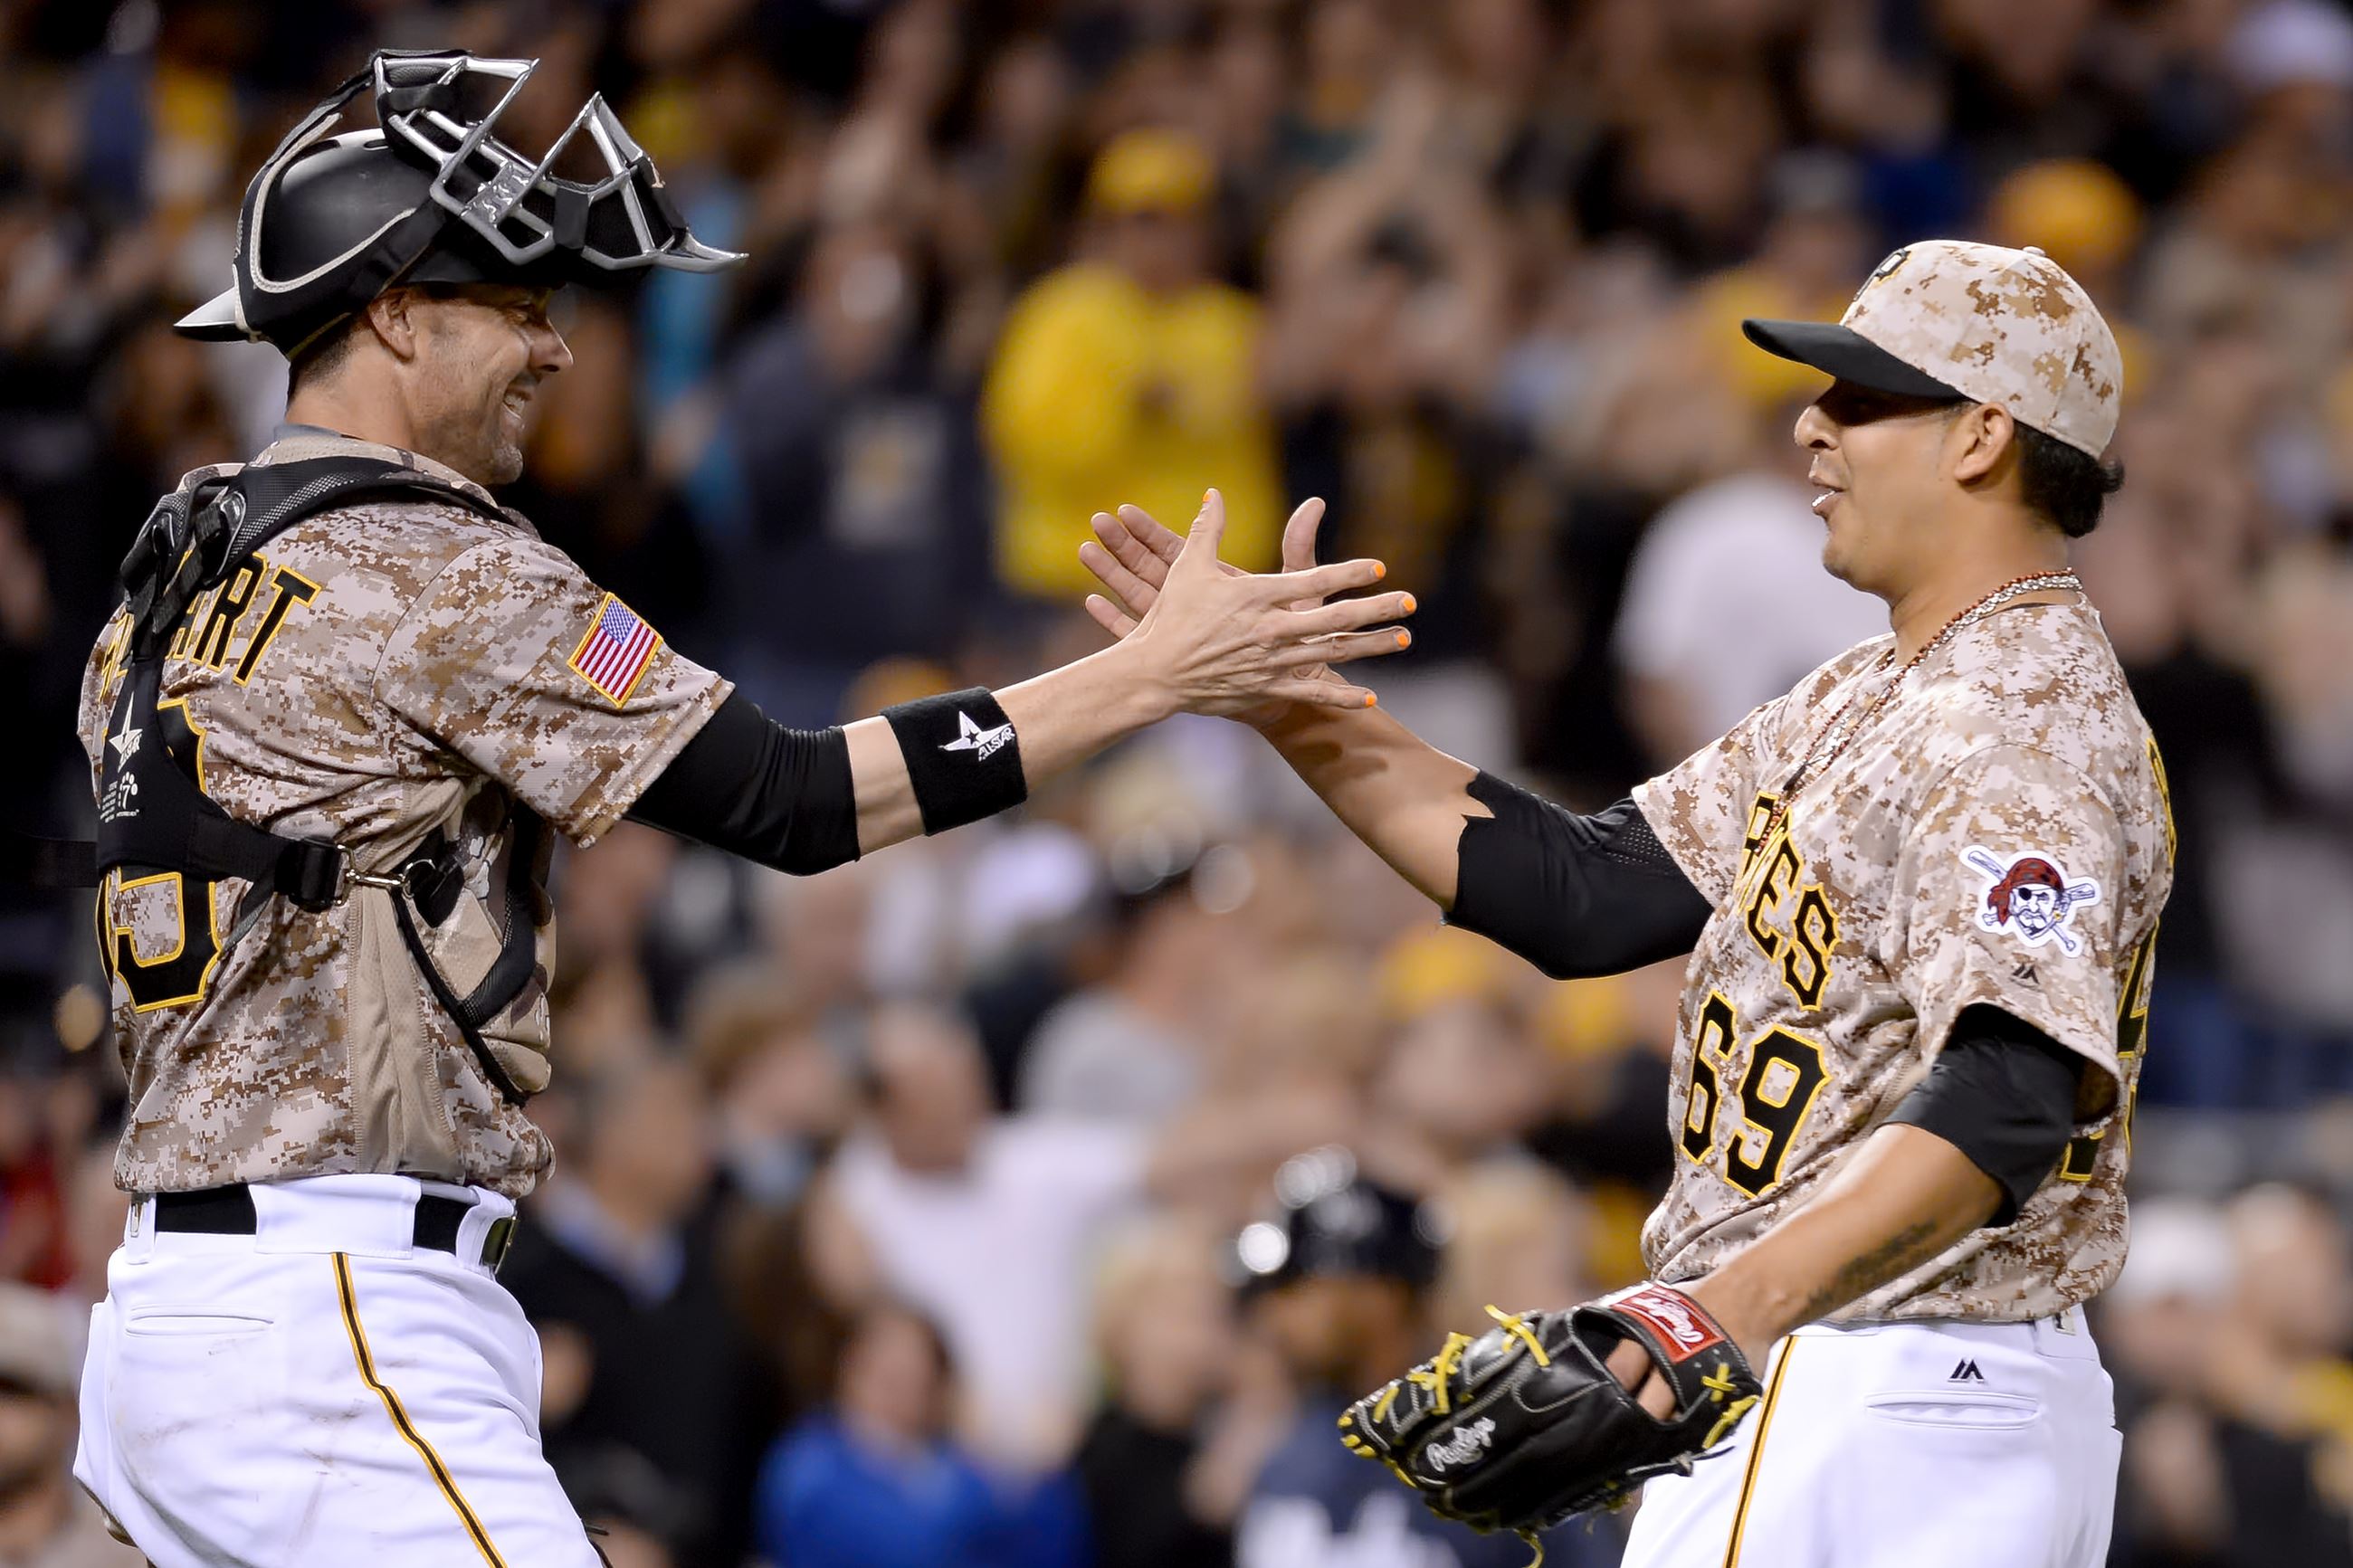 Pirates' Vogelsong hit in head by pitch, leaves game